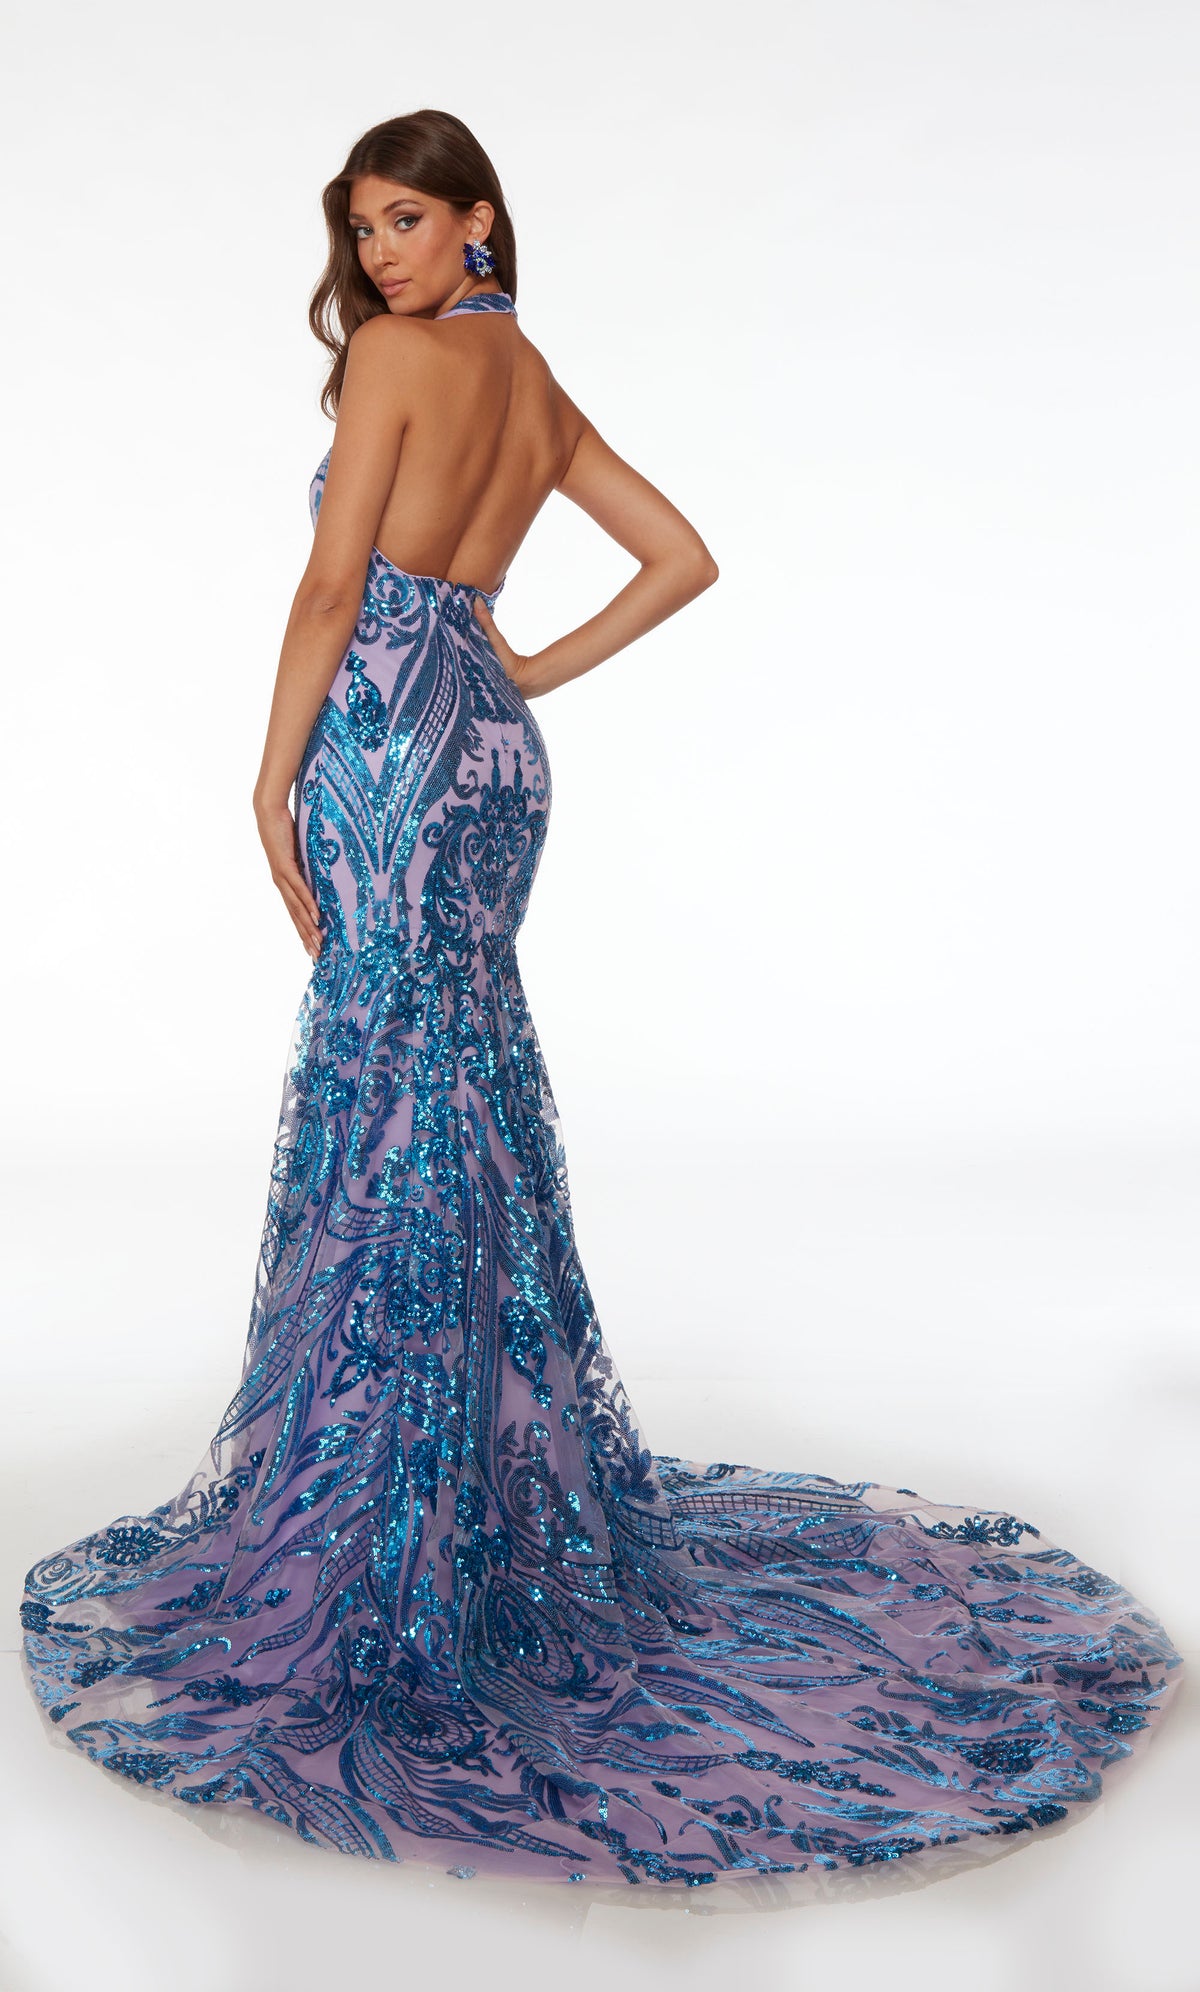 Purple mermaid dress with stunning blue sequin paisley detailing, plunging halter neckline, open back, and an long train for an elegant look.